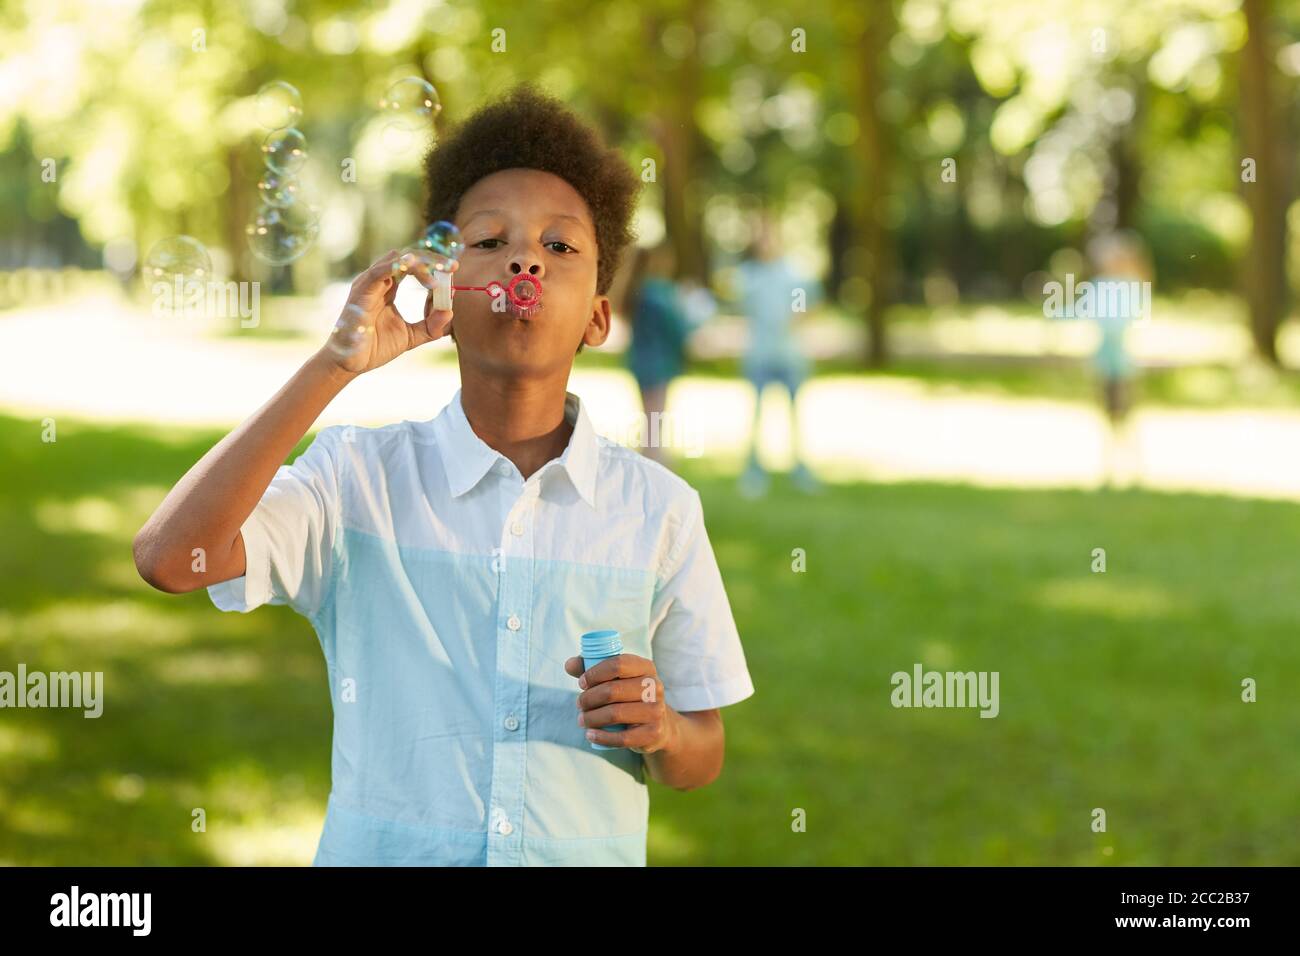 Waist up portrait of teenage African-American boy blowing bubbles while standing in green park outdoors, copy space Stock Photo